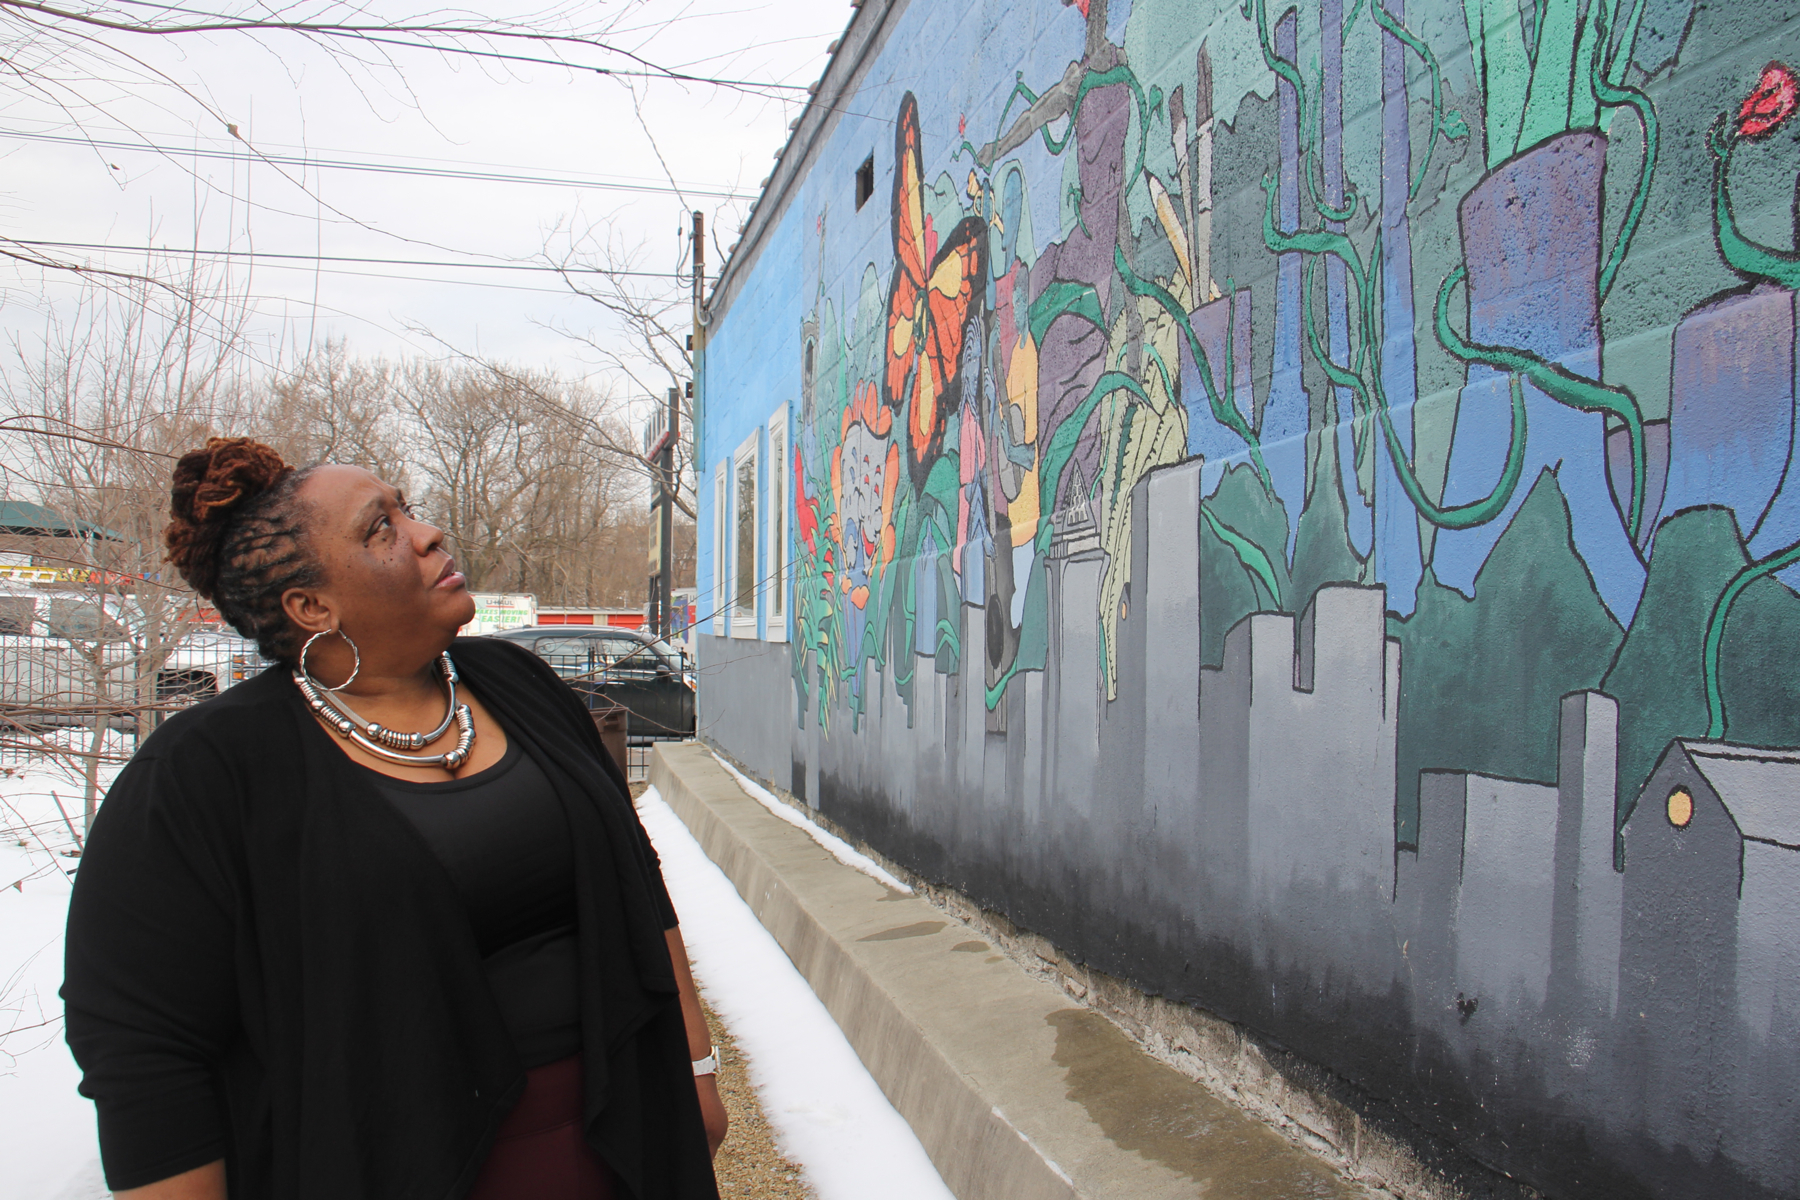 Erica Tunnell educates her neighborhoods about environmental threats. Credit: Emma Lee/WHYY